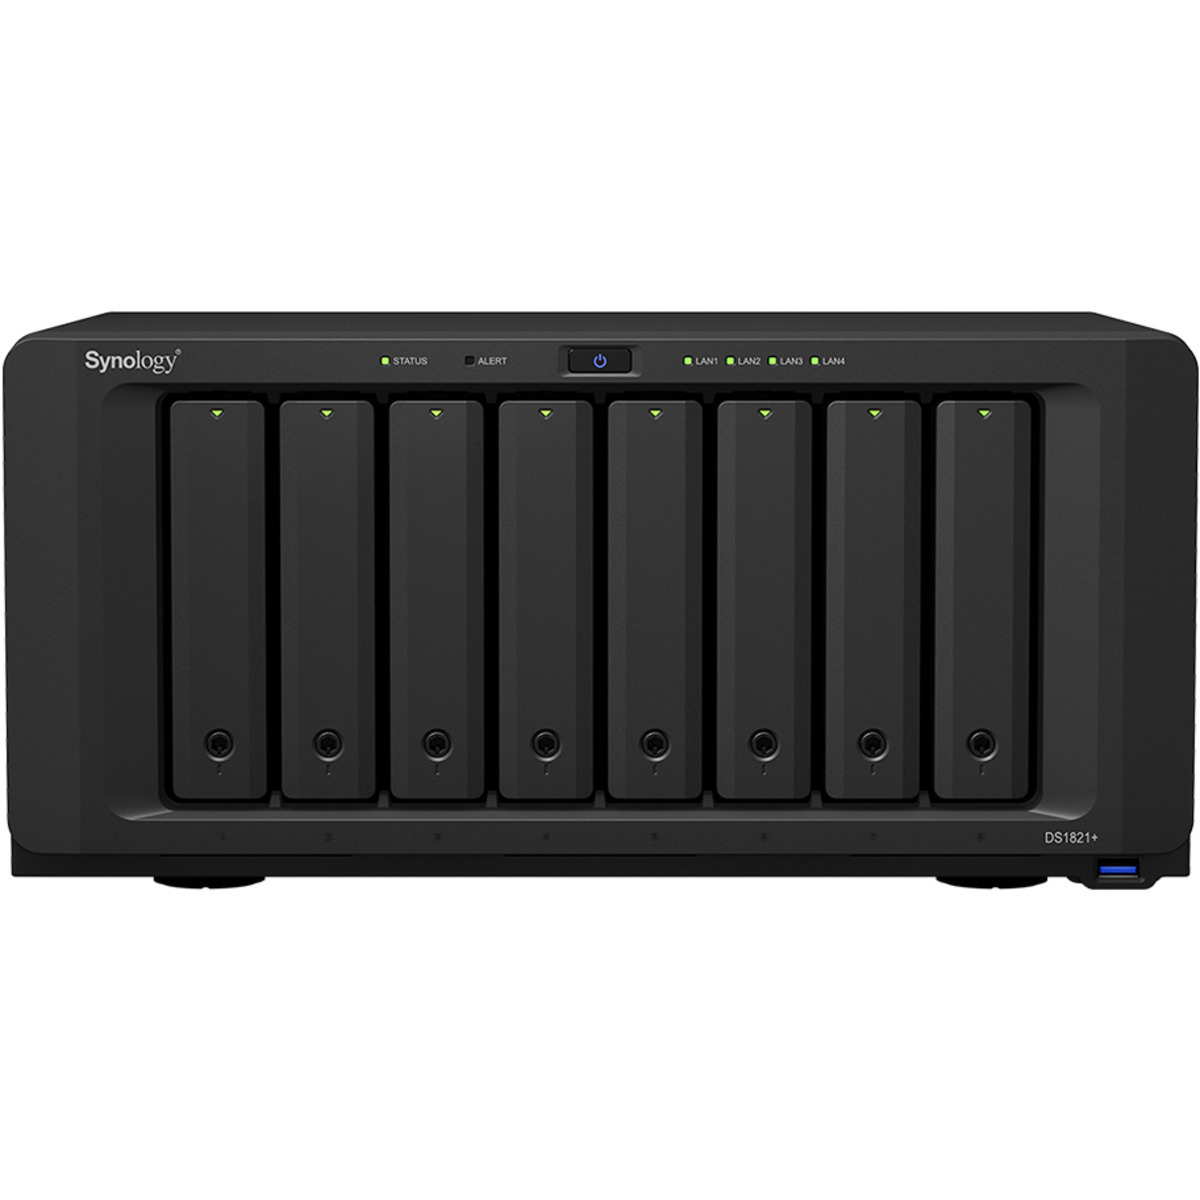 Synology DiskStation DS1821+ 90tb 8-Bay Desktop Multimedia / Power User / Business NAS - Network Attached Storage Device 5x18tb Western Digital Red Pro WD181KFGX 3.5 7200rpm SATA 6Gb/s HDD NAS Class Drives Installed - Burn-In Tested - FREE RAM UPGRADE DiskStation DS1821+